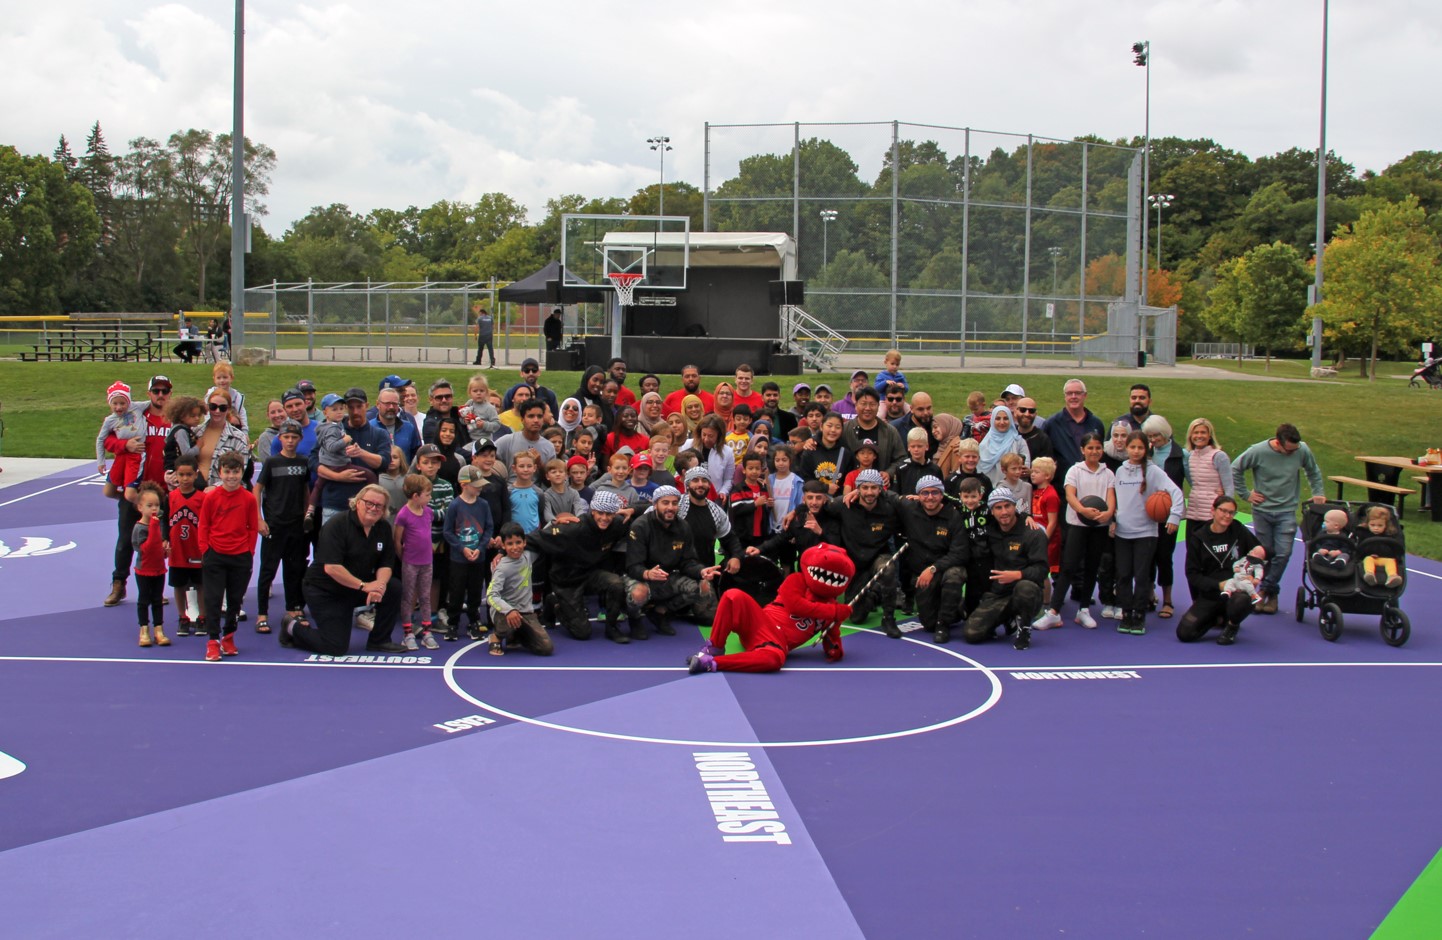 globalnews.ca - Kate Otterbein - Toronto Raptors unveil newly upgraded basketball courts in London, Ont.